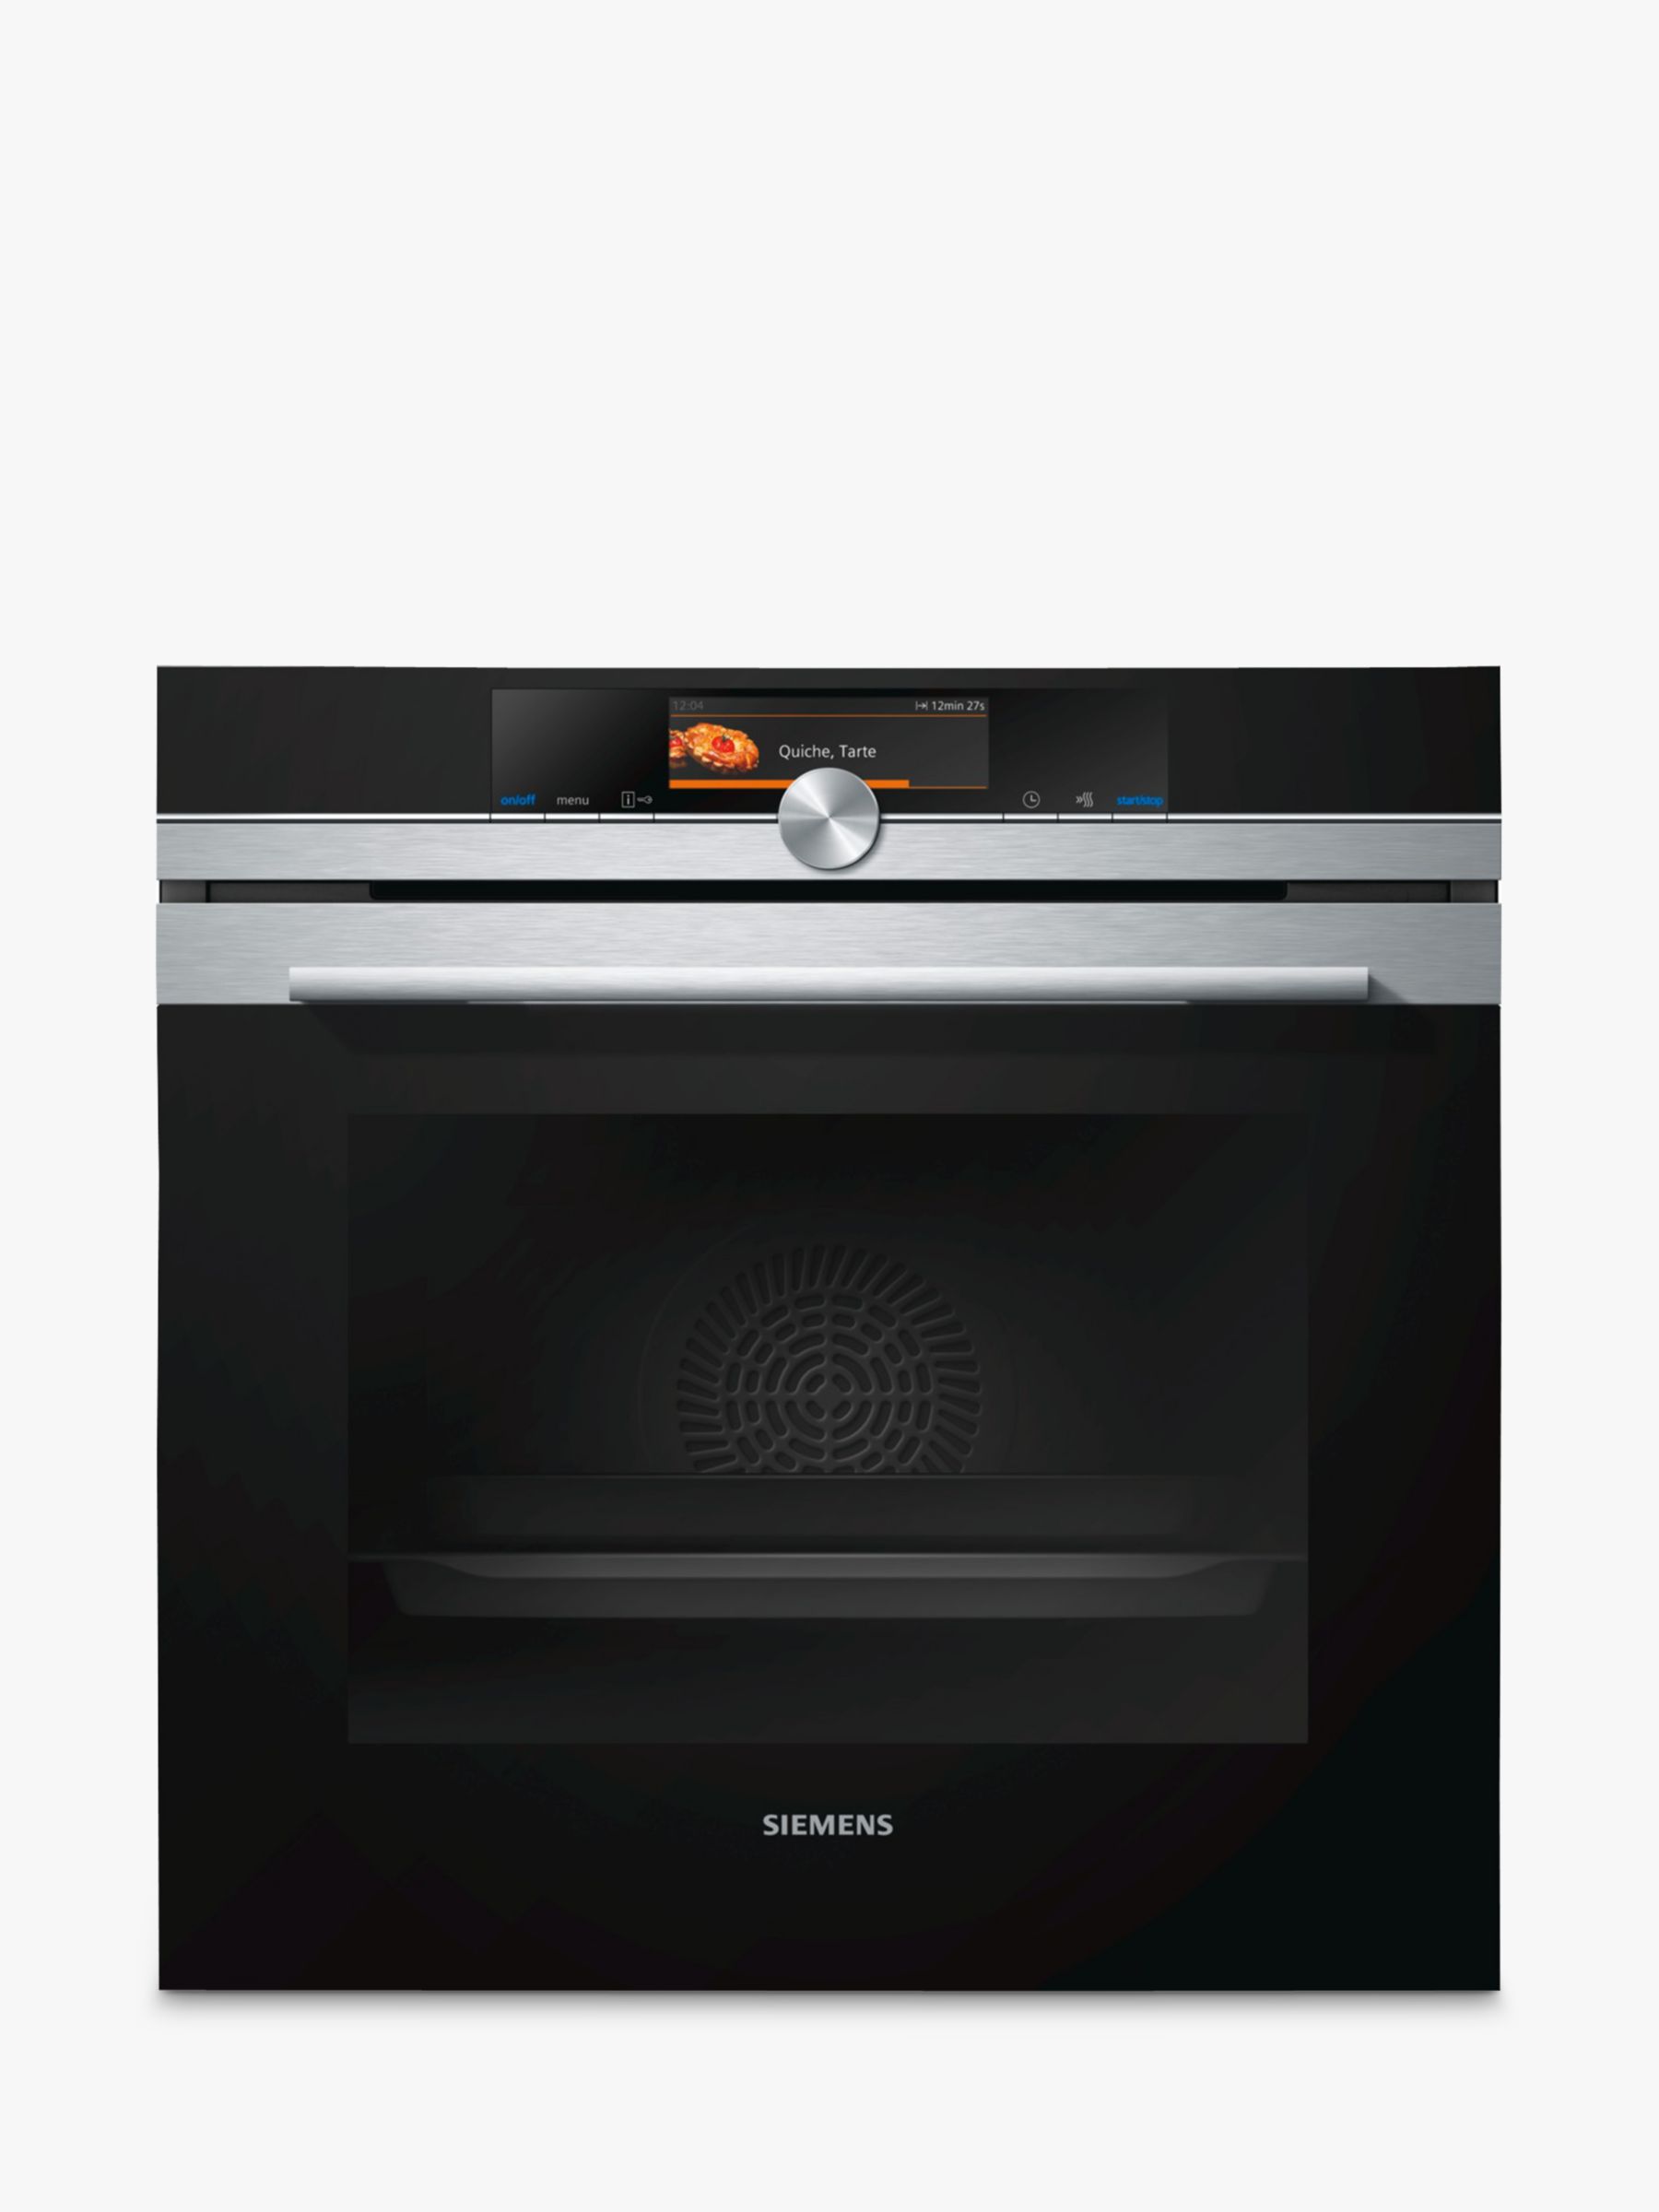 Siemens iQ700 HB678GBS6B Built In Electric Self Cleaning Single Oven, Stainless Steel